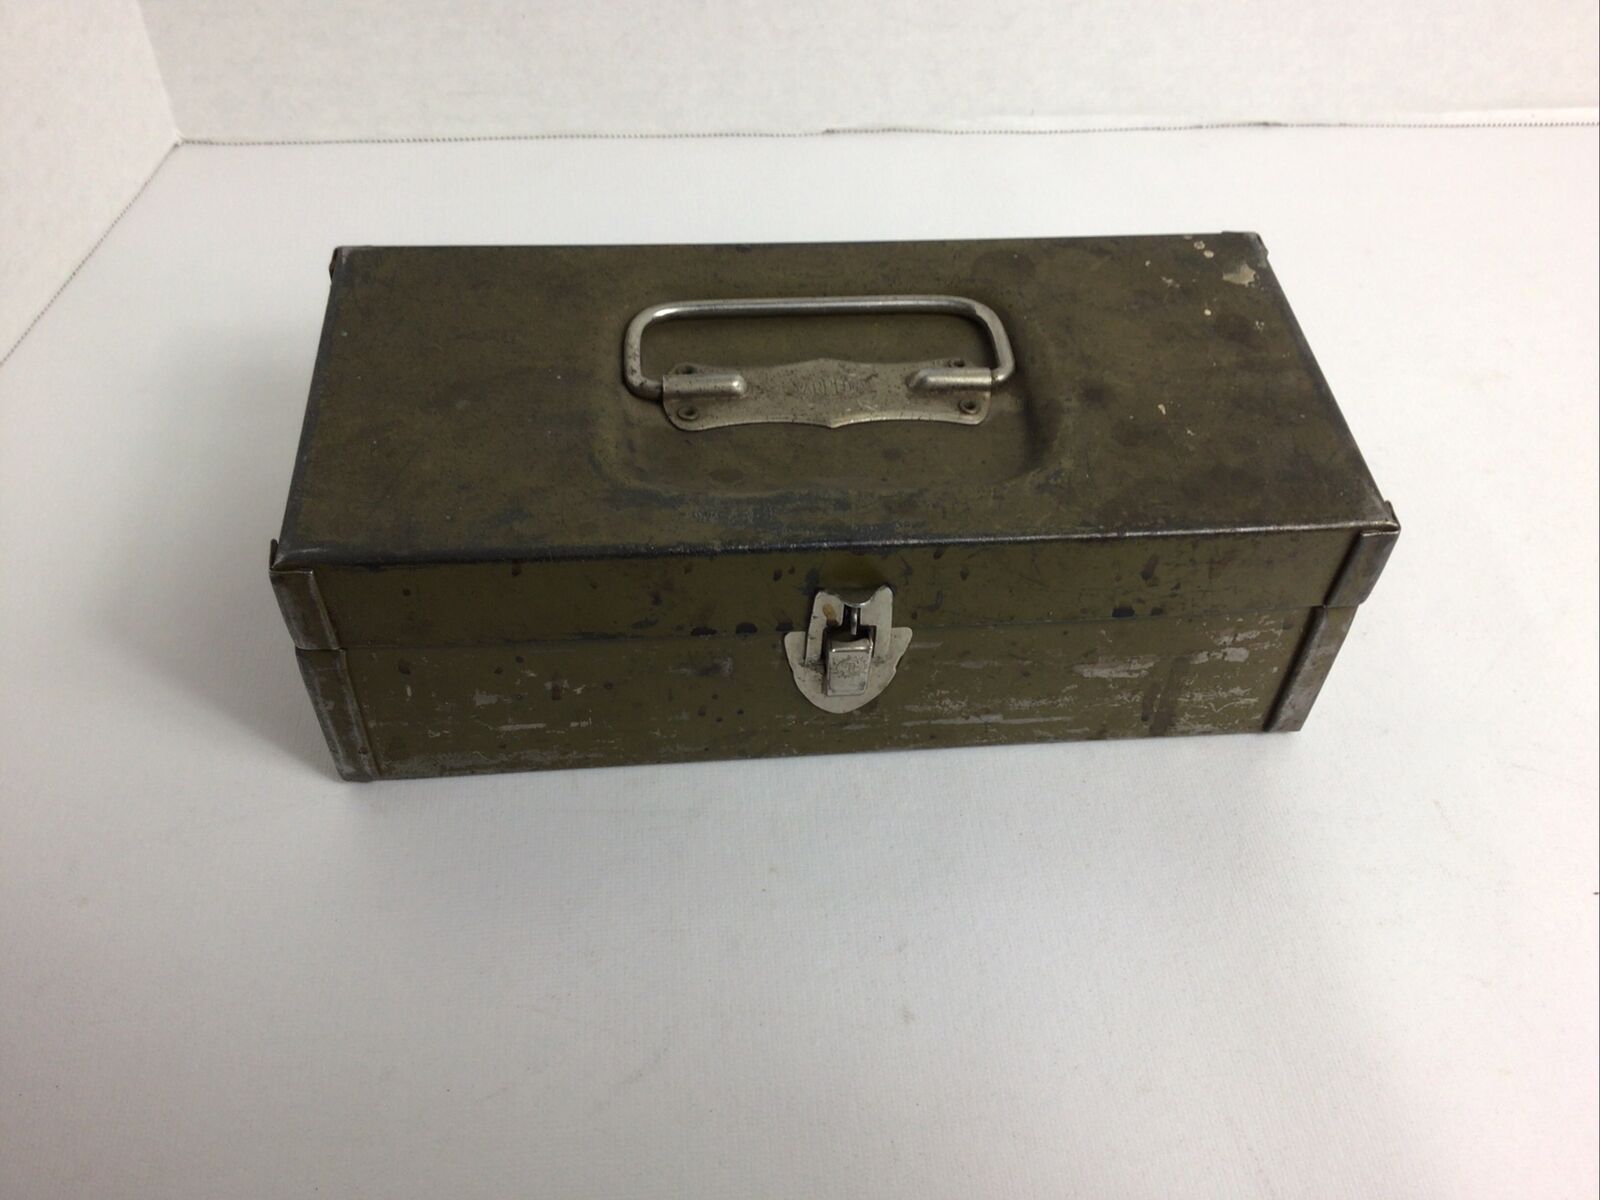 Antique 1930s Parplus Metal Products Co. Cash Strong Box Tackle Money Papers